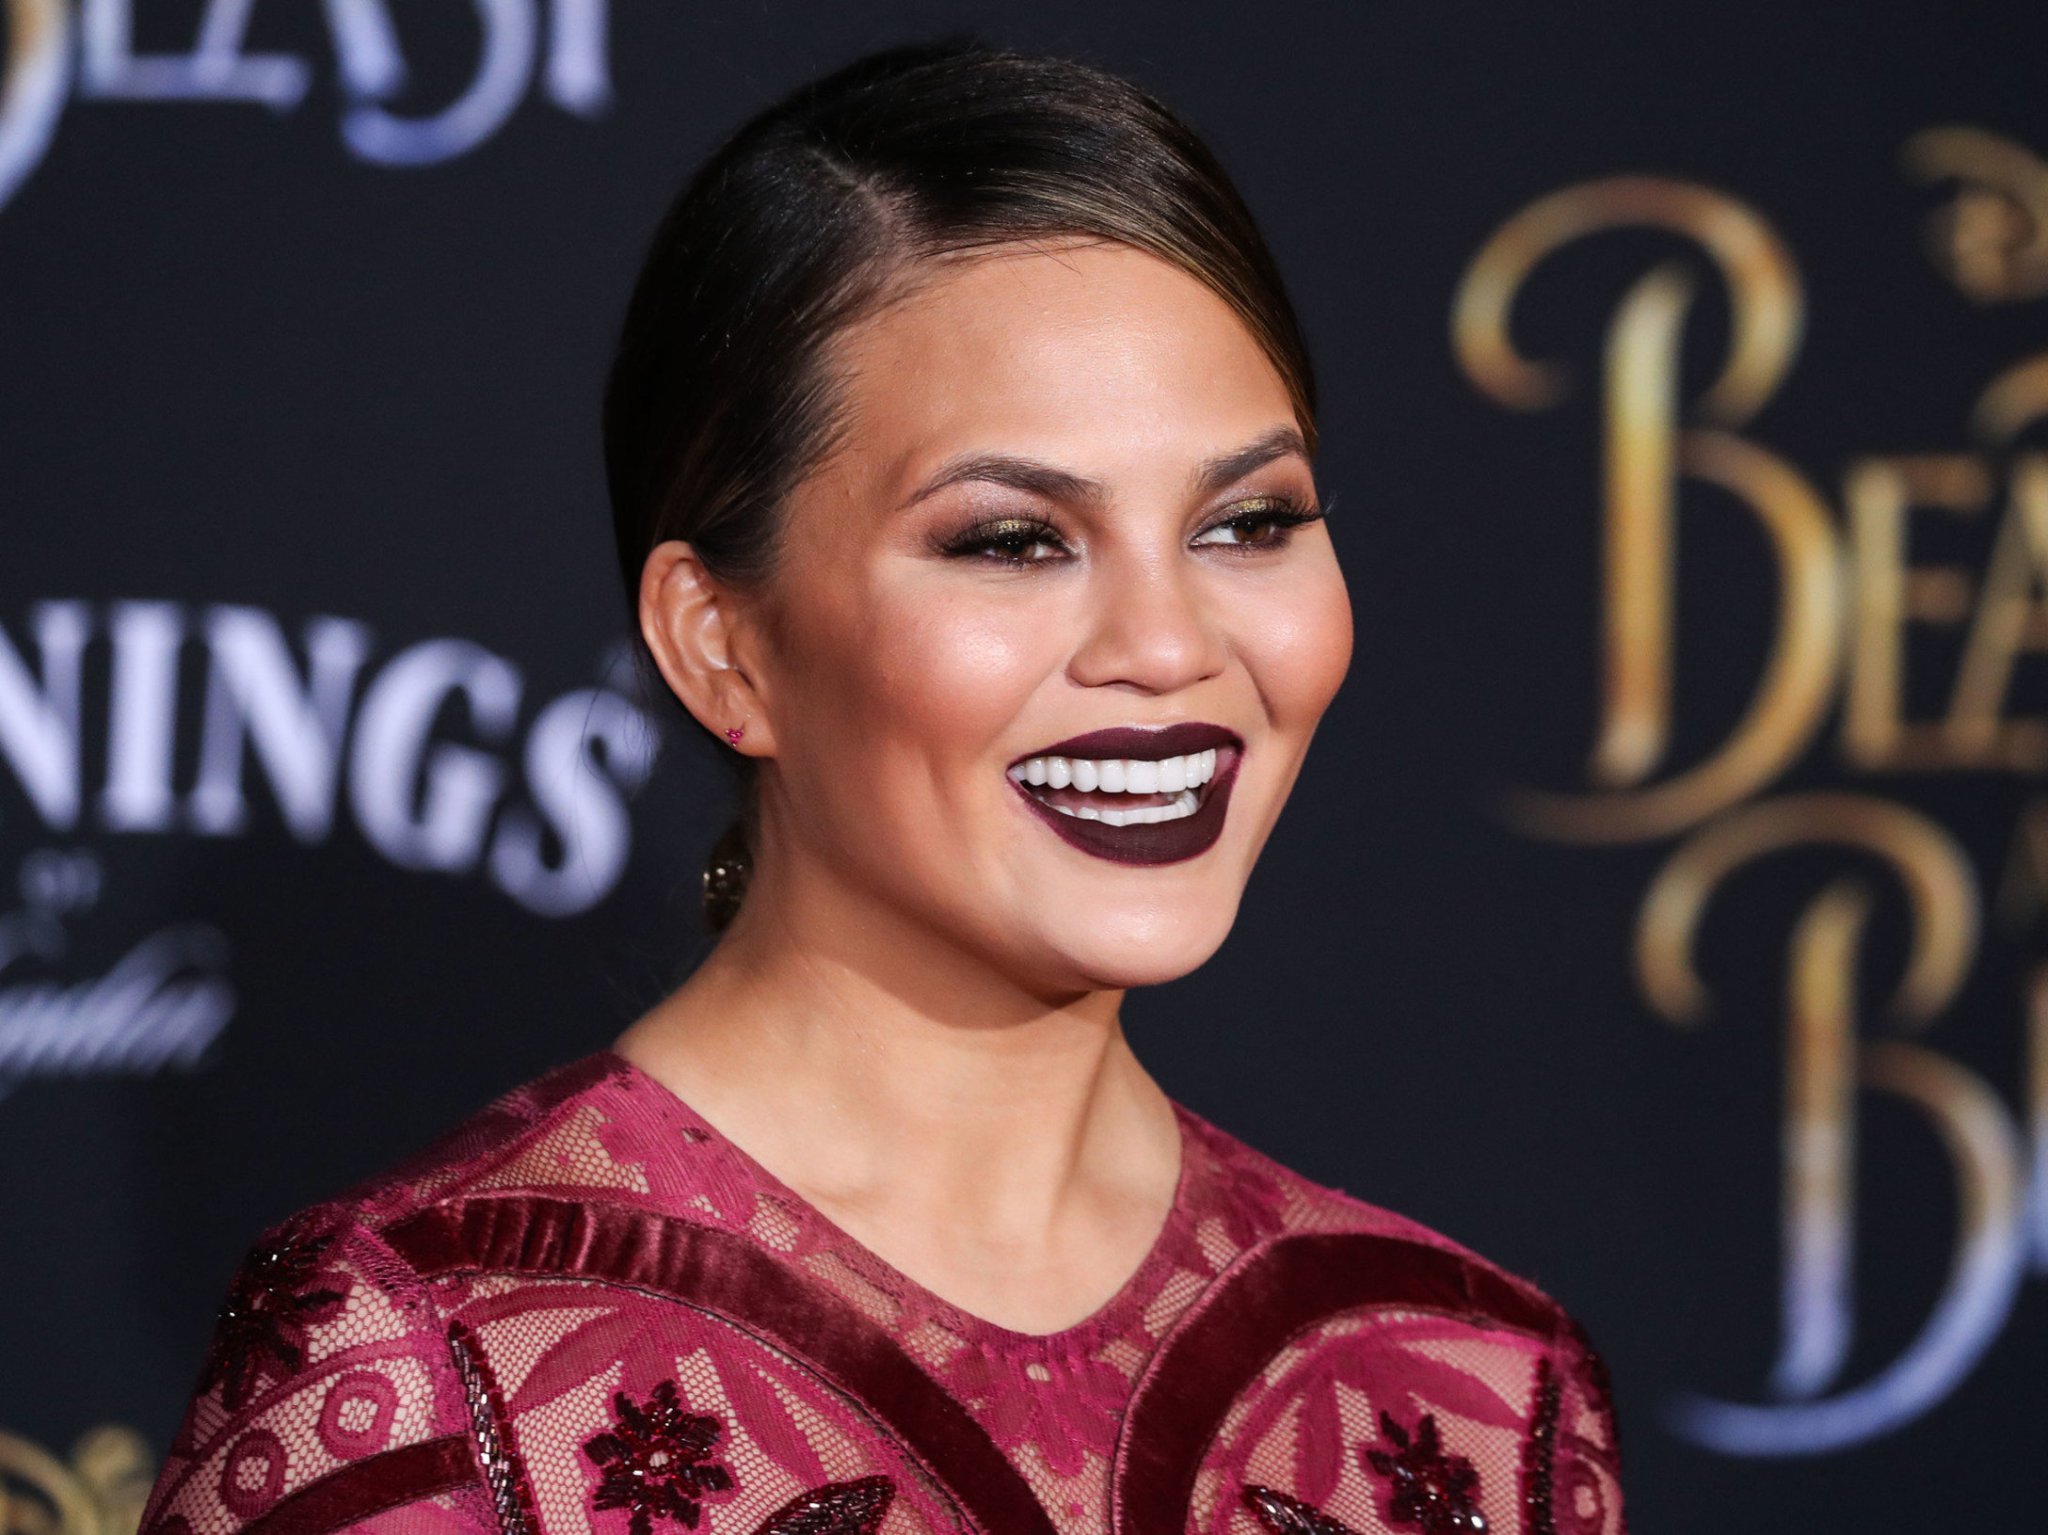 Chrissy Teigen's latest plastic surgery reveal has people riled up